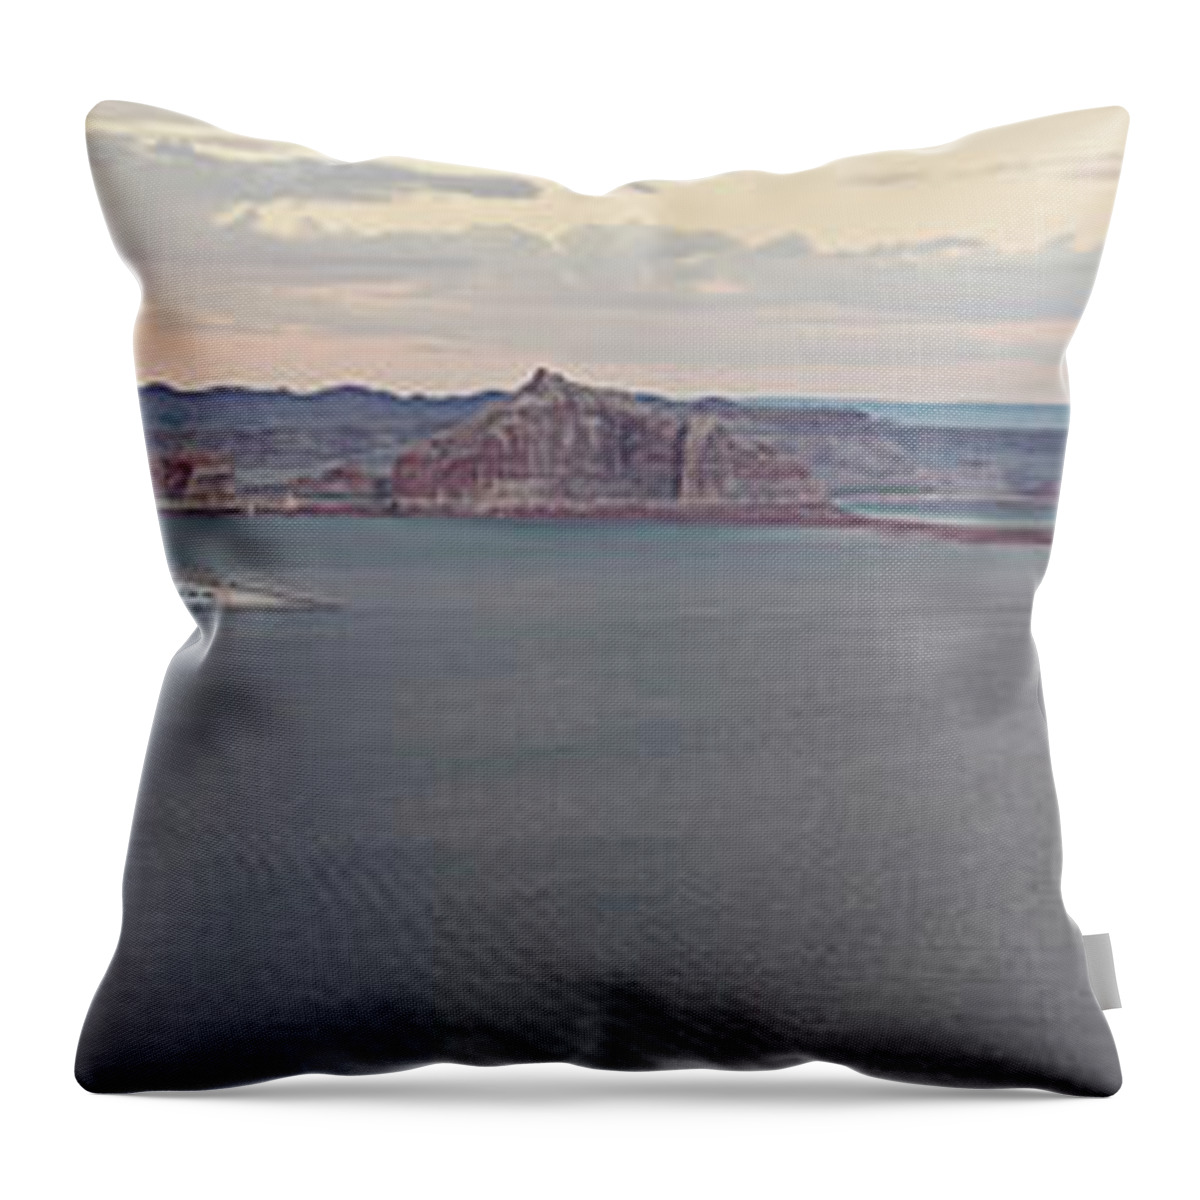 Scenics Throw Pillow featuring the photograph Sunset At Lake Powell by Magnez2